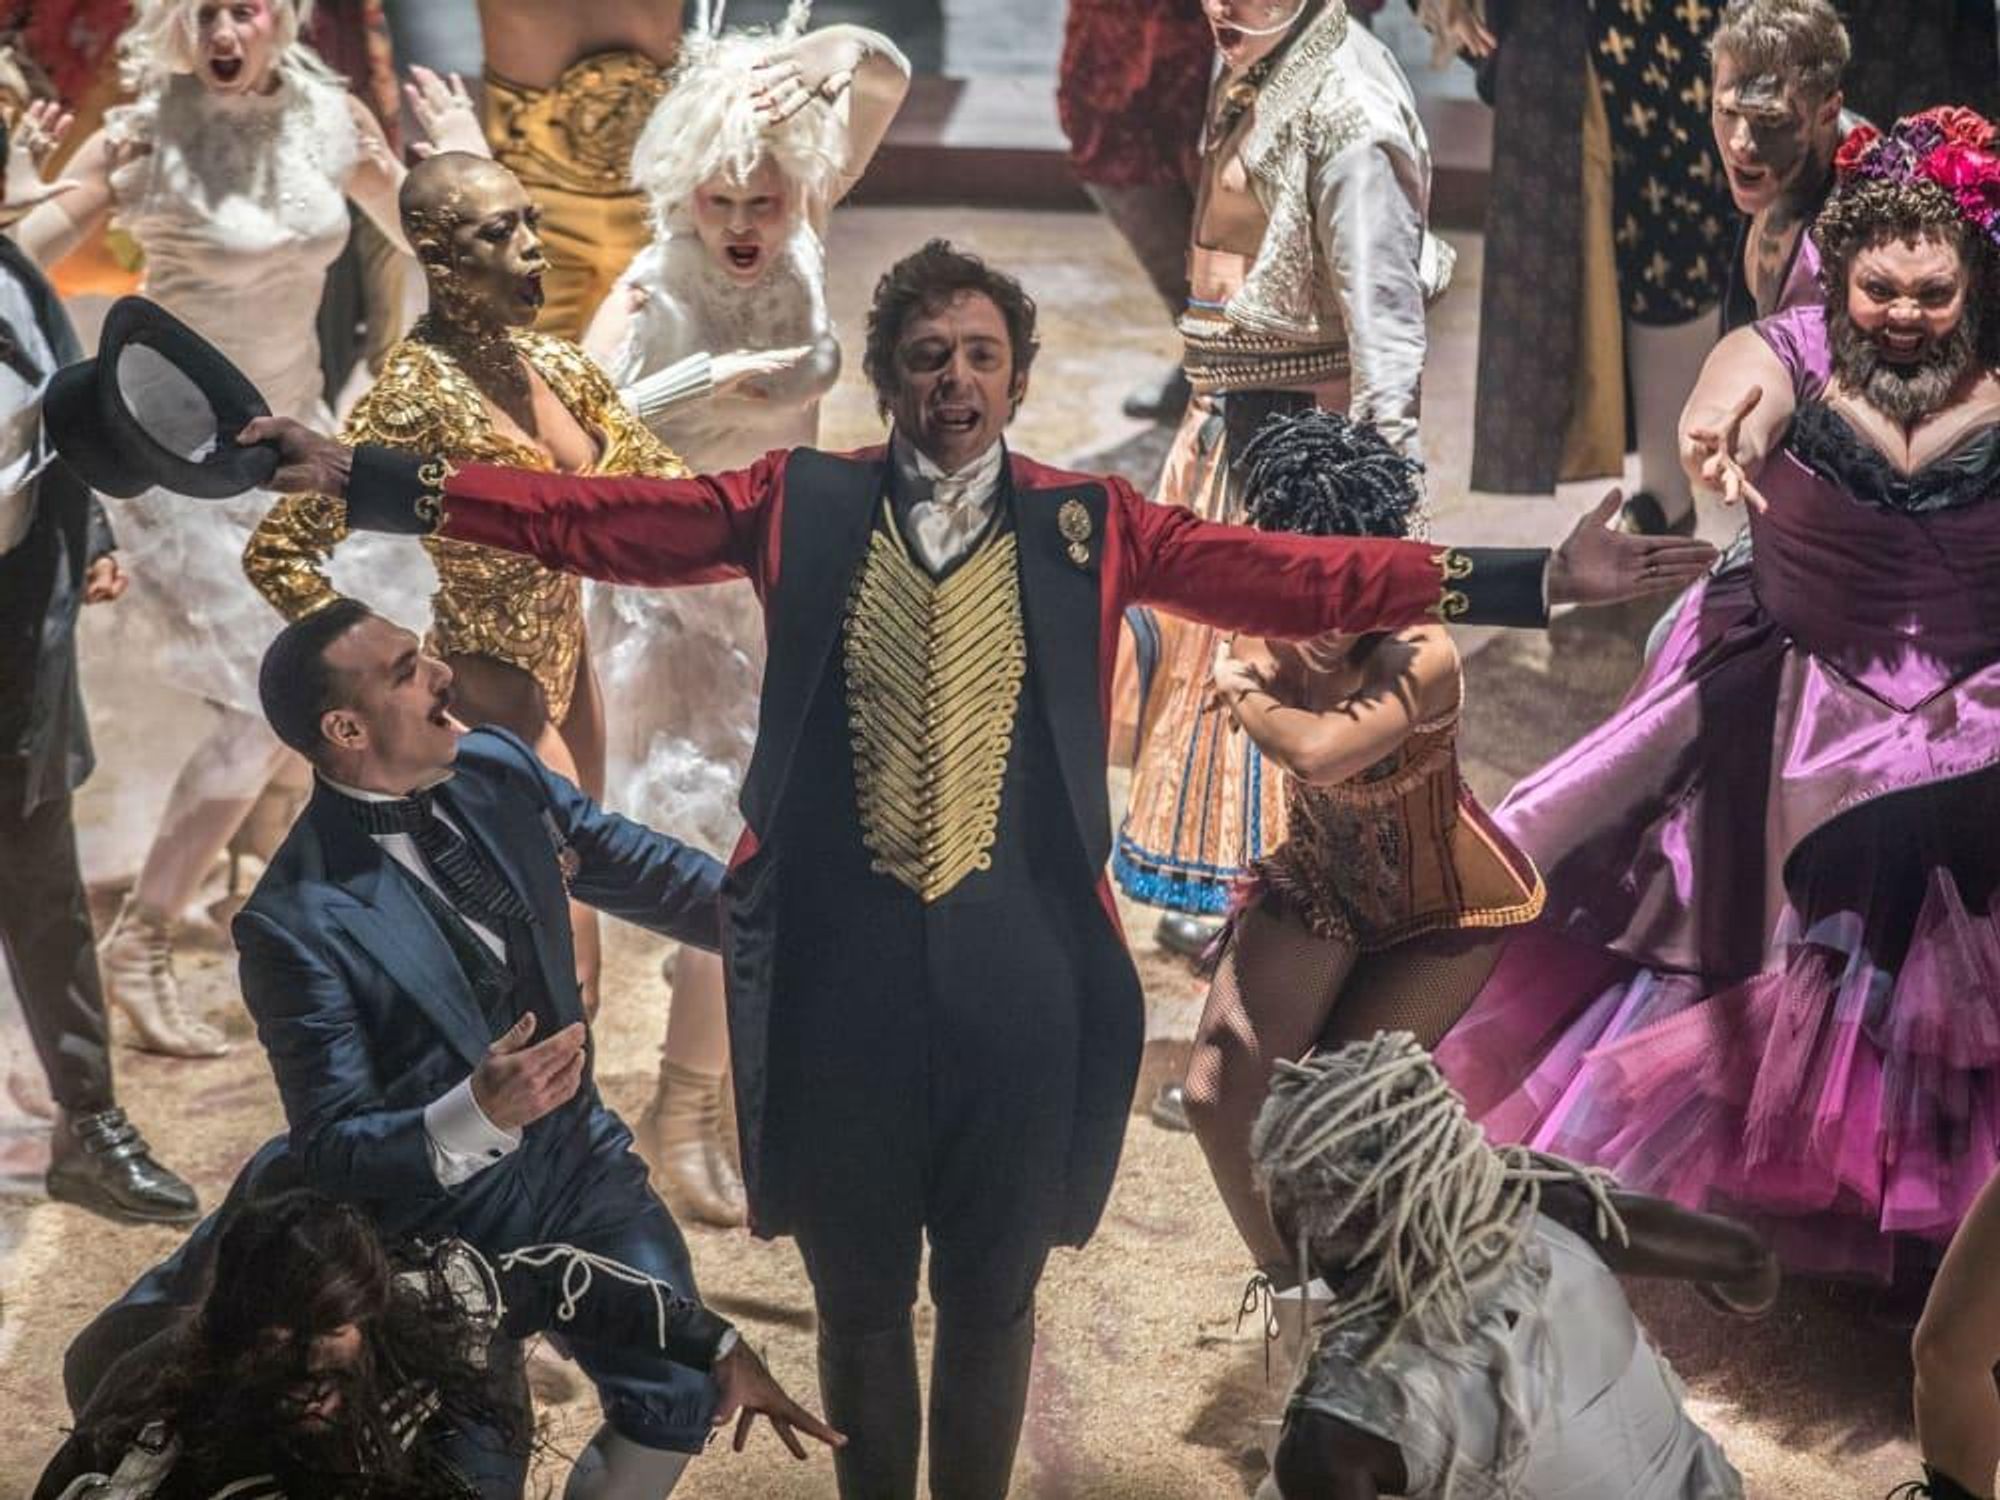 Hugh Jackman and cast in The Greatest Showman